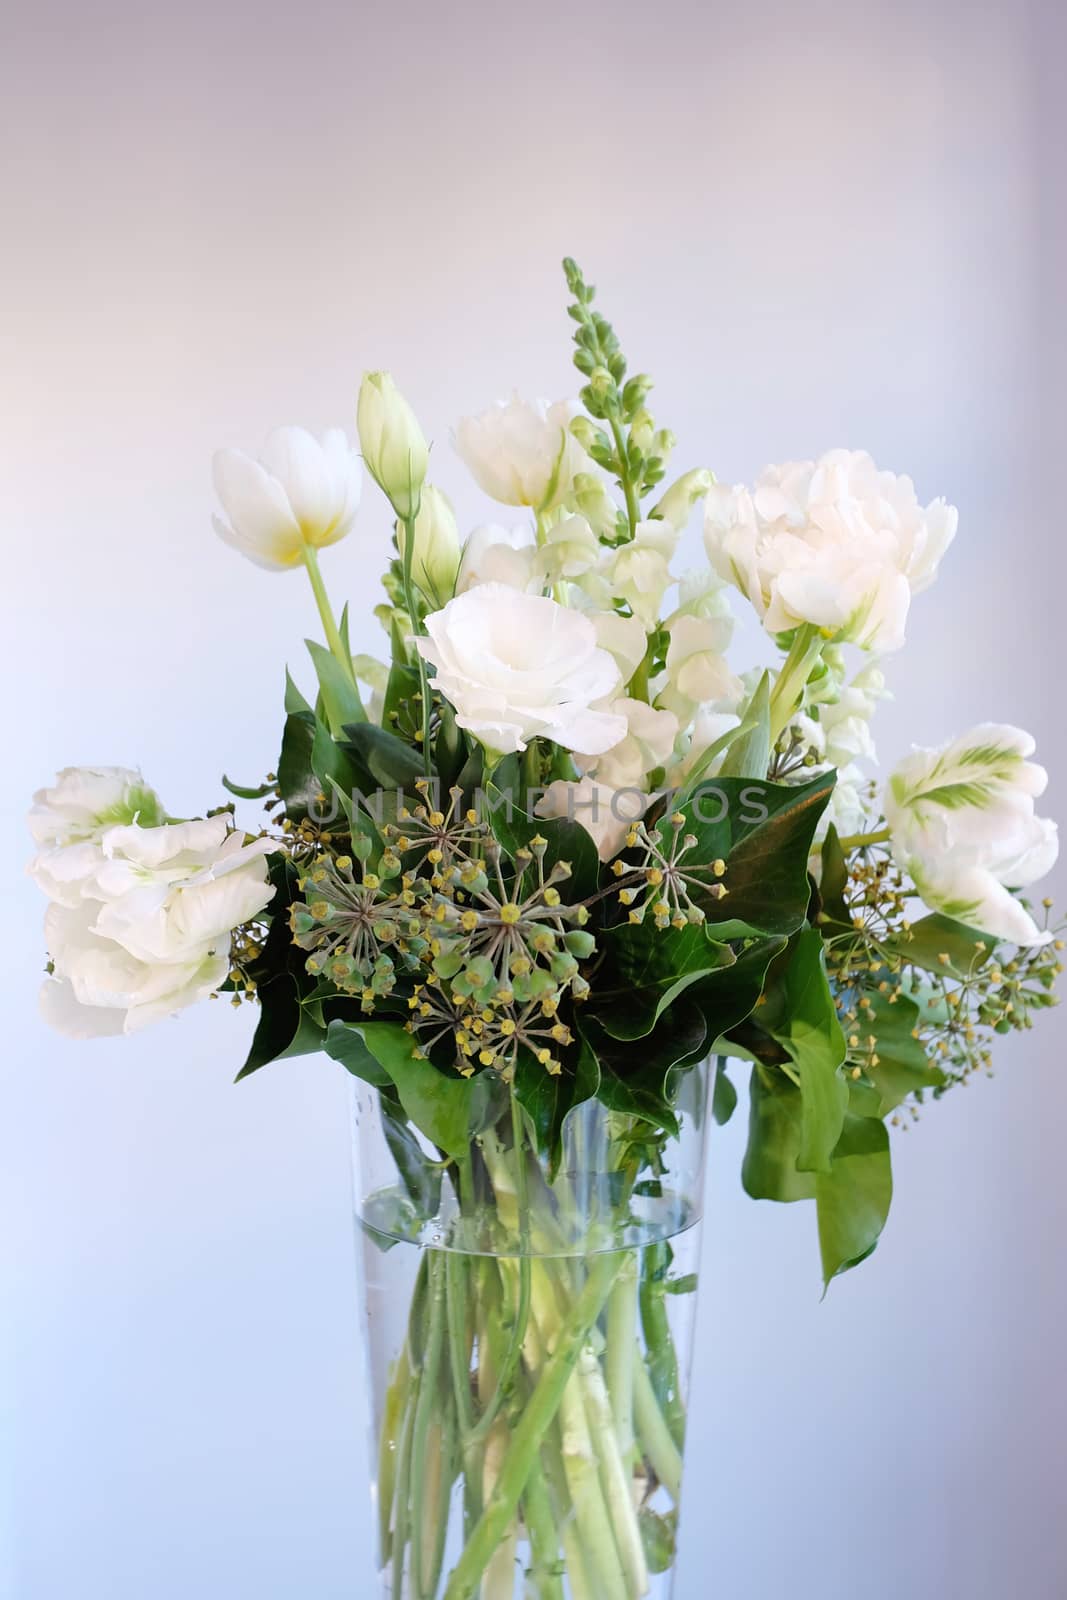 Bouquet of white and green flowers in a glass vase